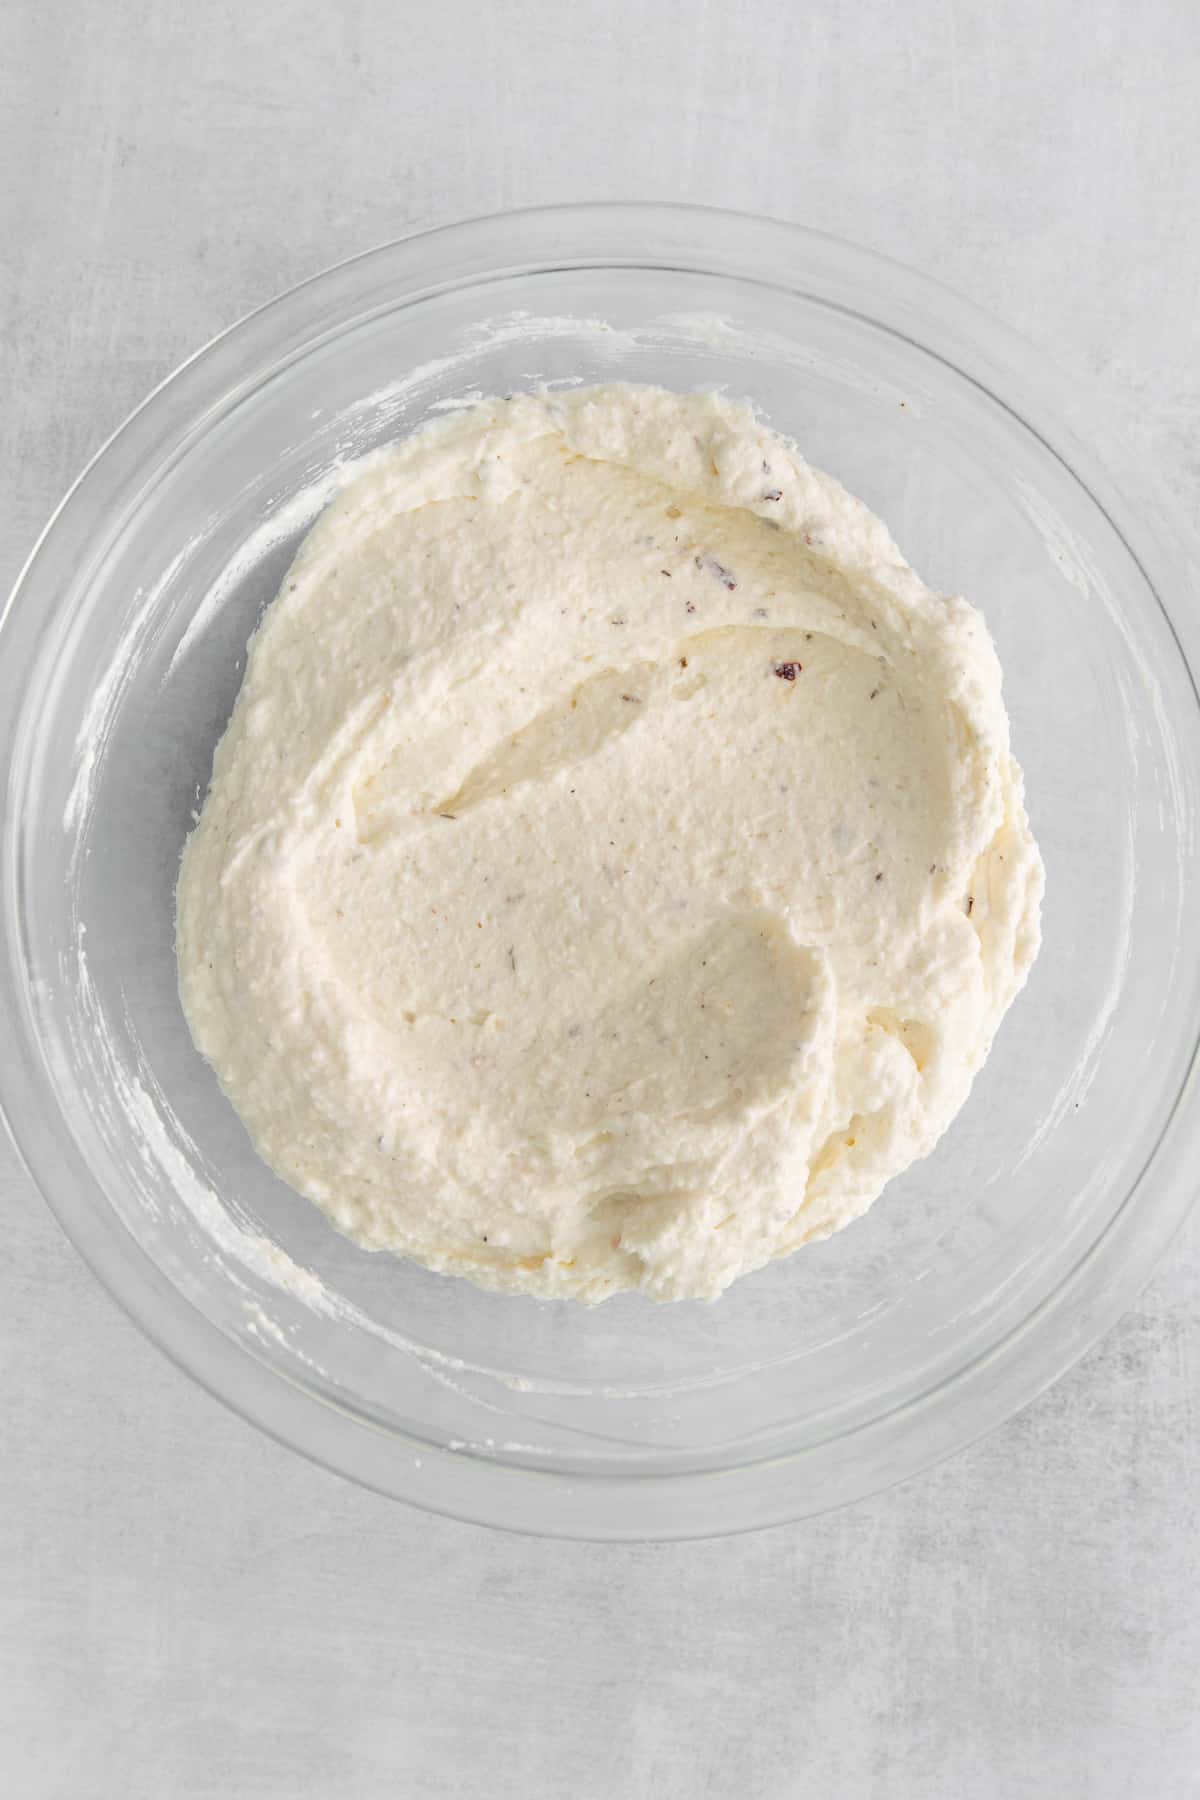 cream cheese and ricotta cheese in bowl.